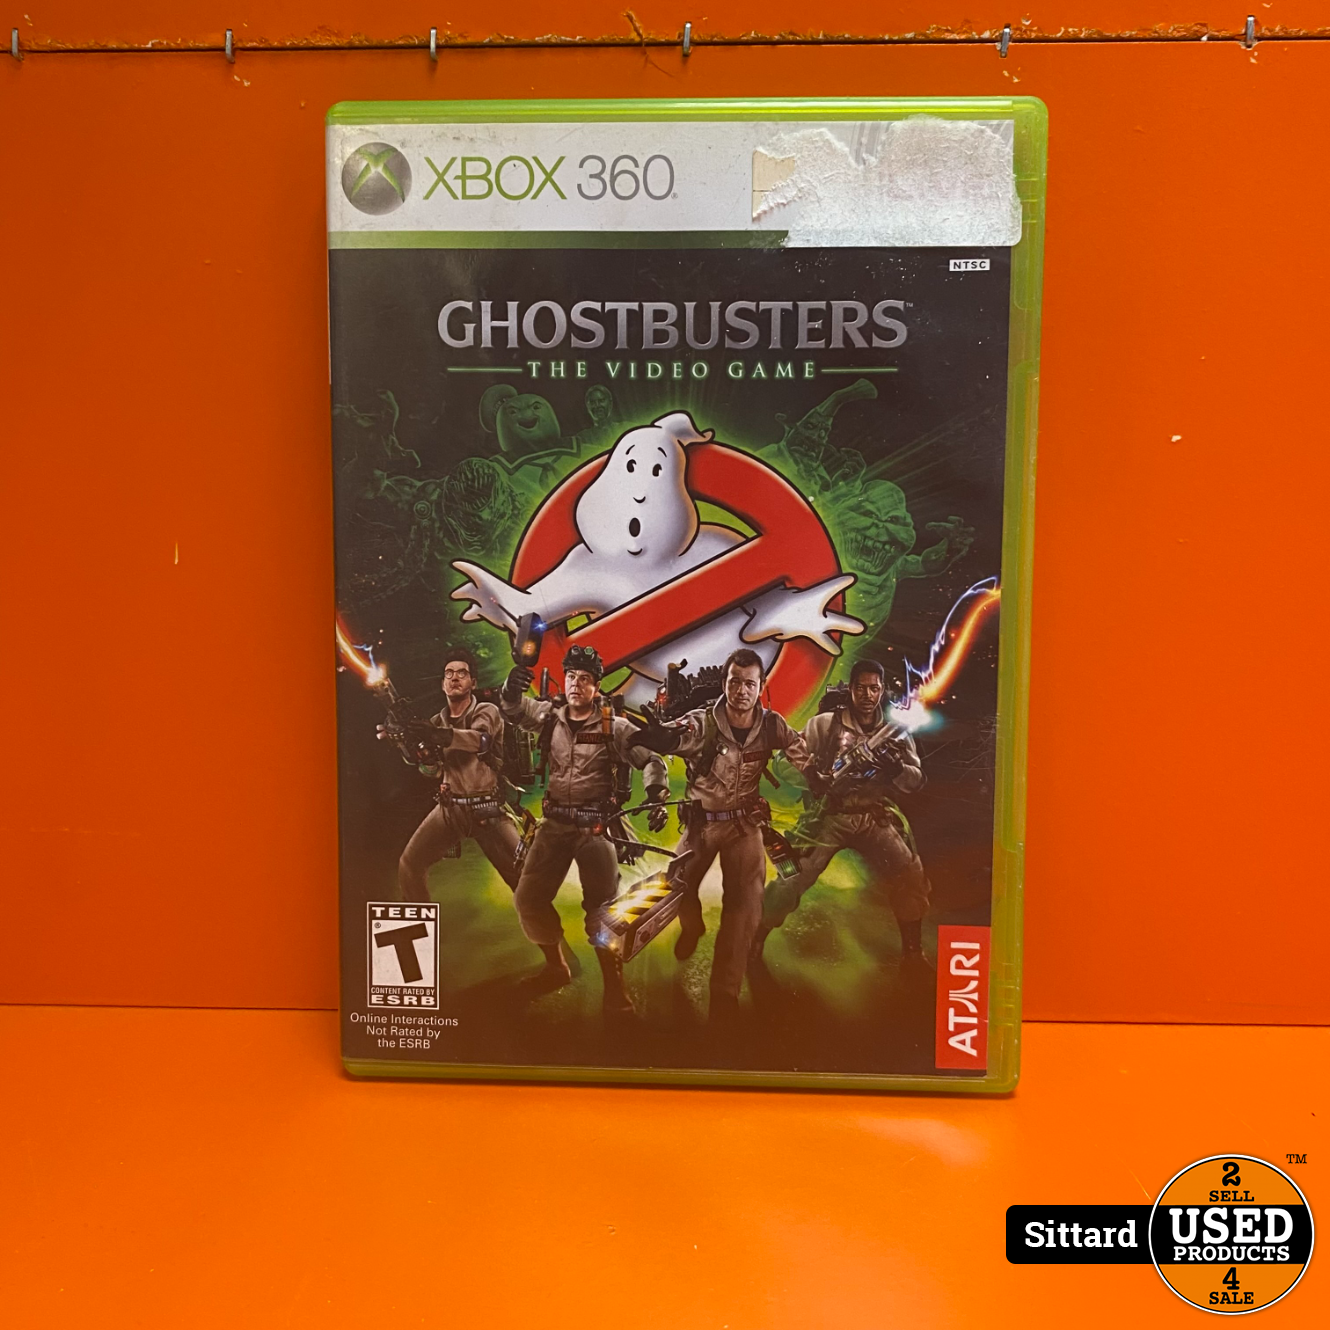 Soldaat Pardon sensatie Xbox 360 Game - Ghostbusters the Videogame - Used Products Sittard